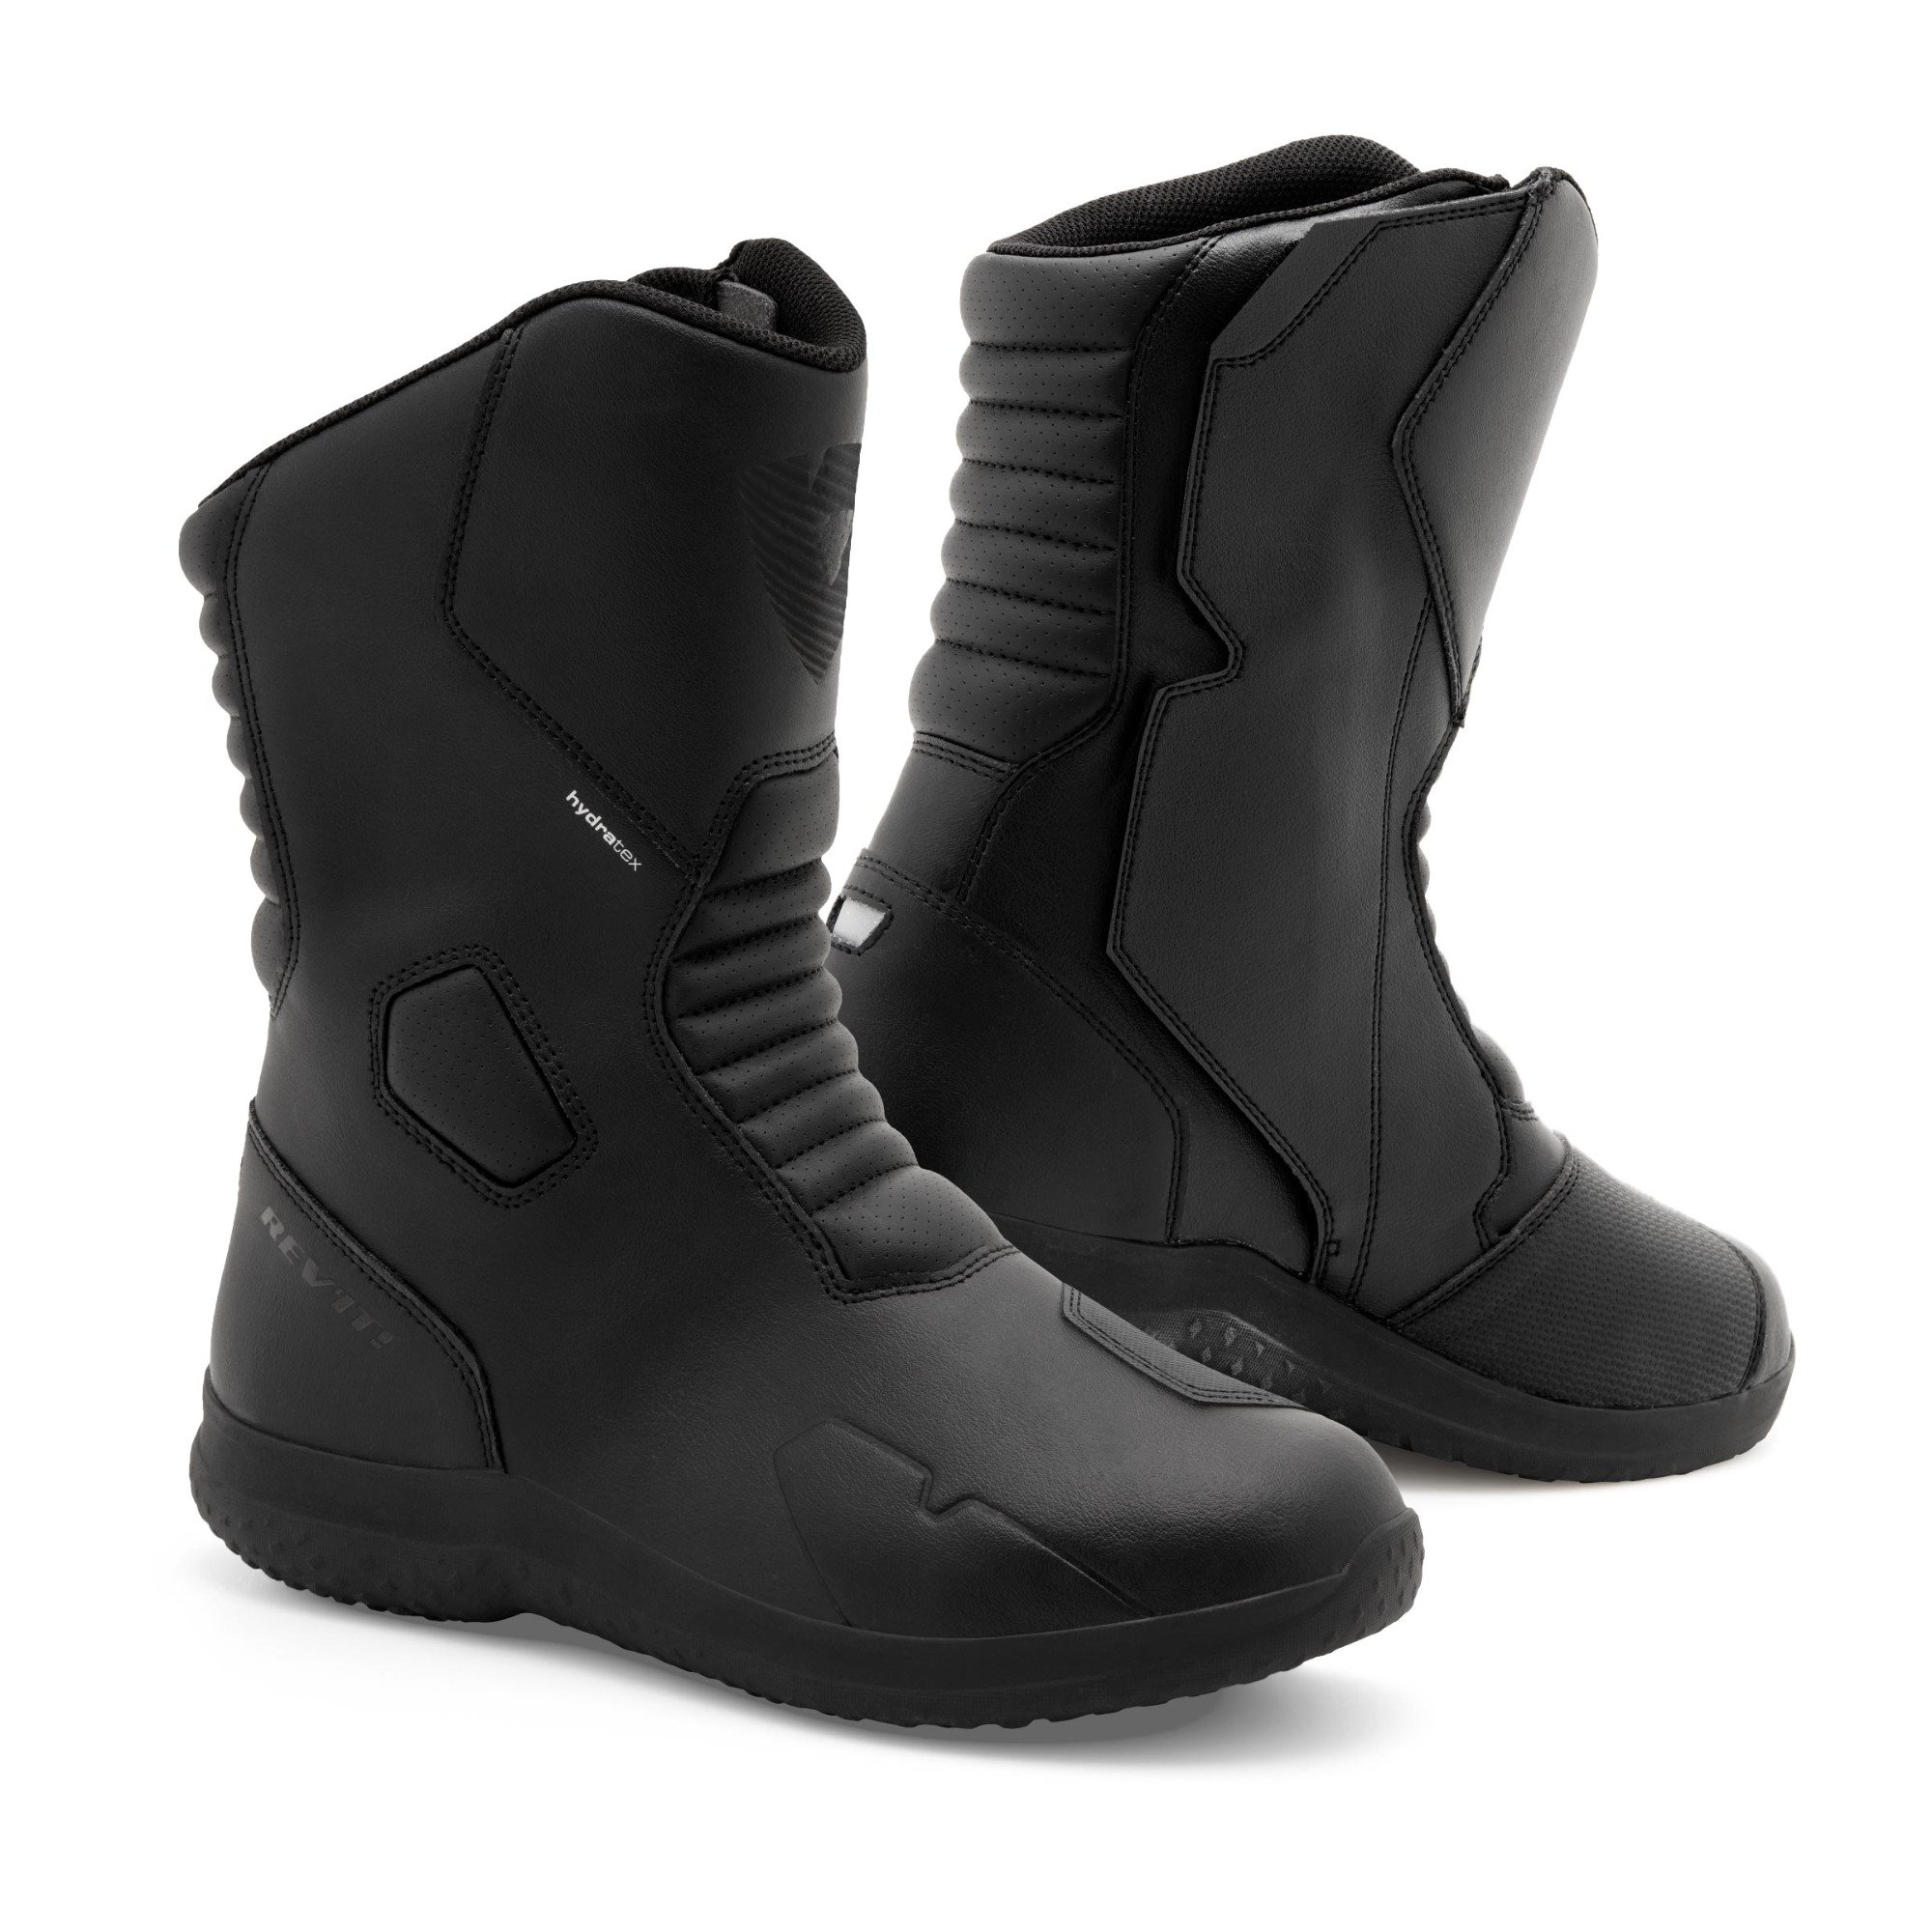 Image of REV'IT! Boots Flux H2O Black Size 40 ID 8700001330497